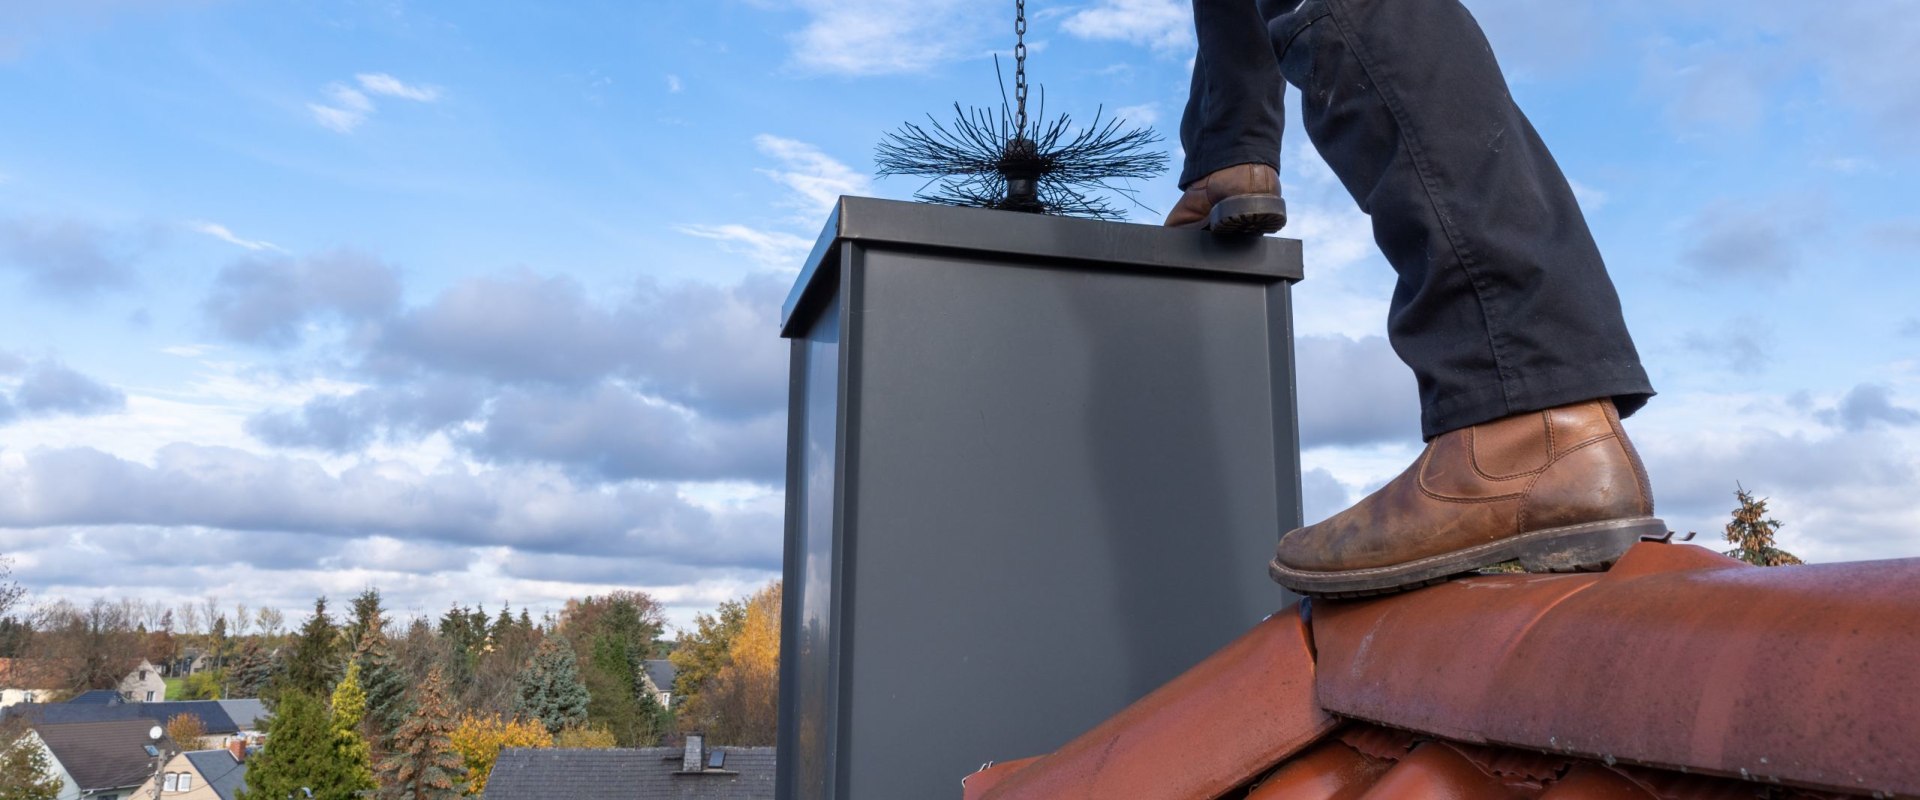 The Importance of Annual Inspections and Cleaning for Chimneys and Fireplaces